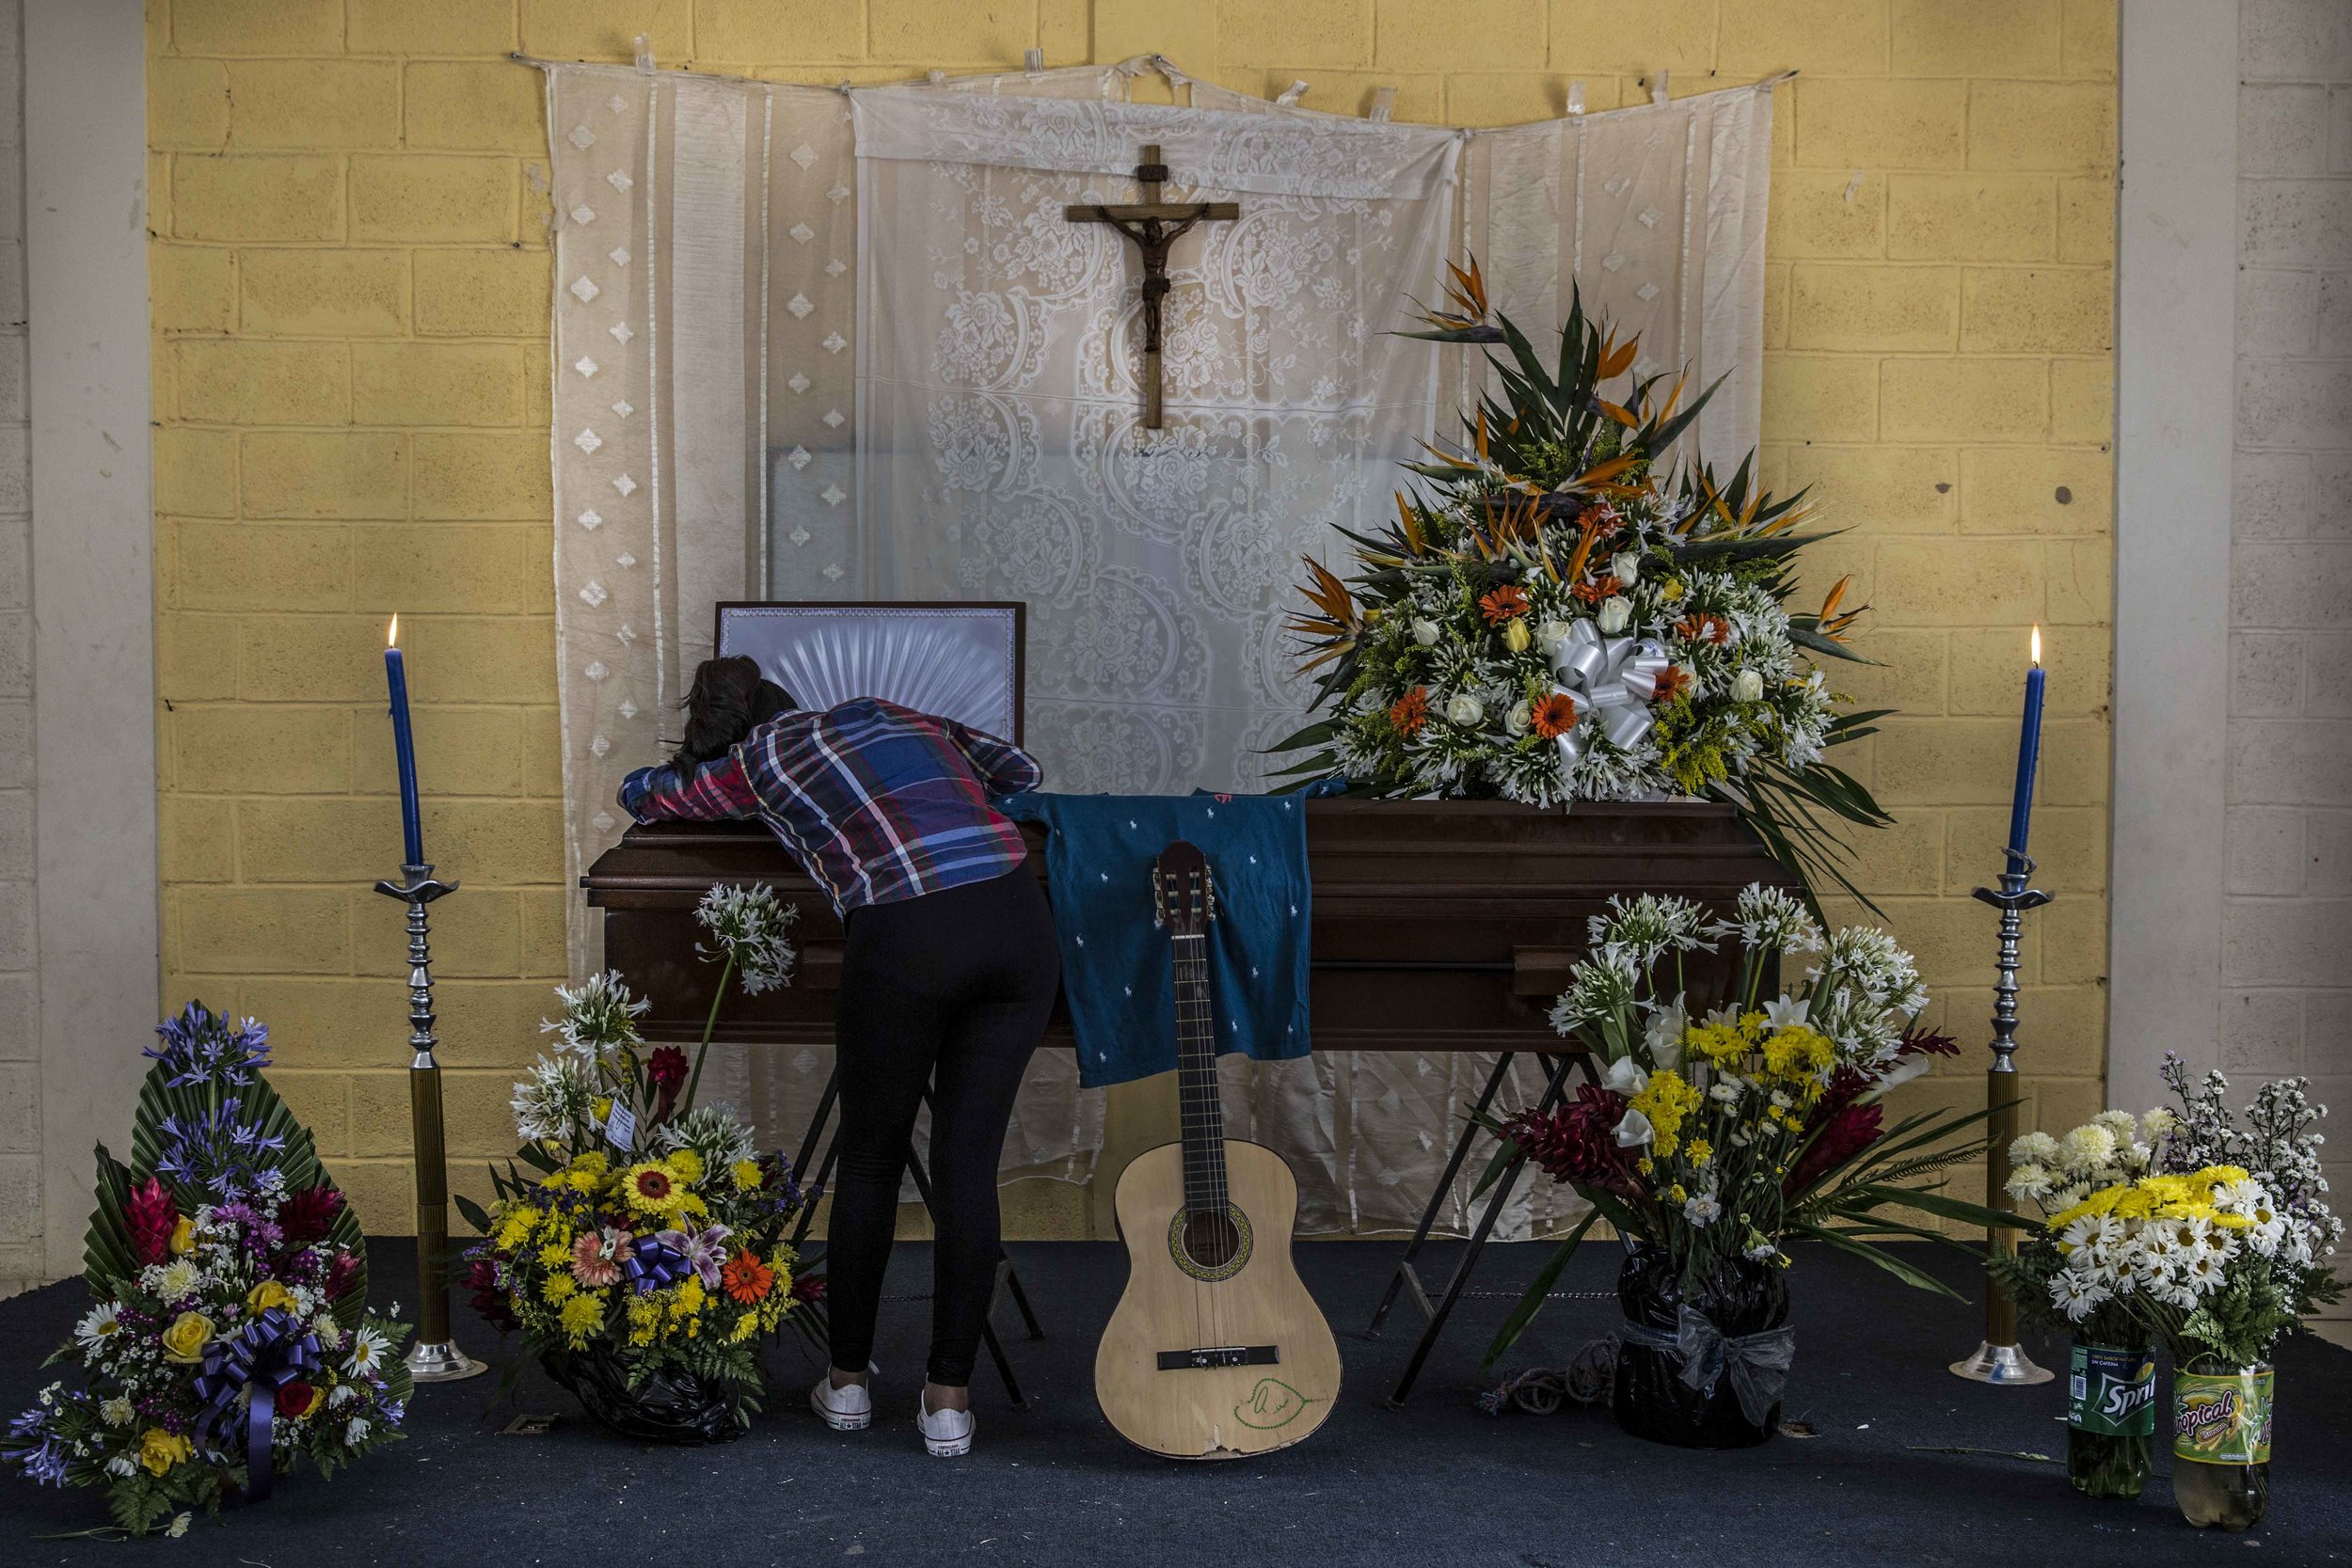  Relatives and friends of a boy murdered in the street a few days earlier, pay homage to him at his funeral held in a church building a few steps from the place of the murder, in one of the most dangerous neighborhoods of the capital Tegucigalpa, Hon